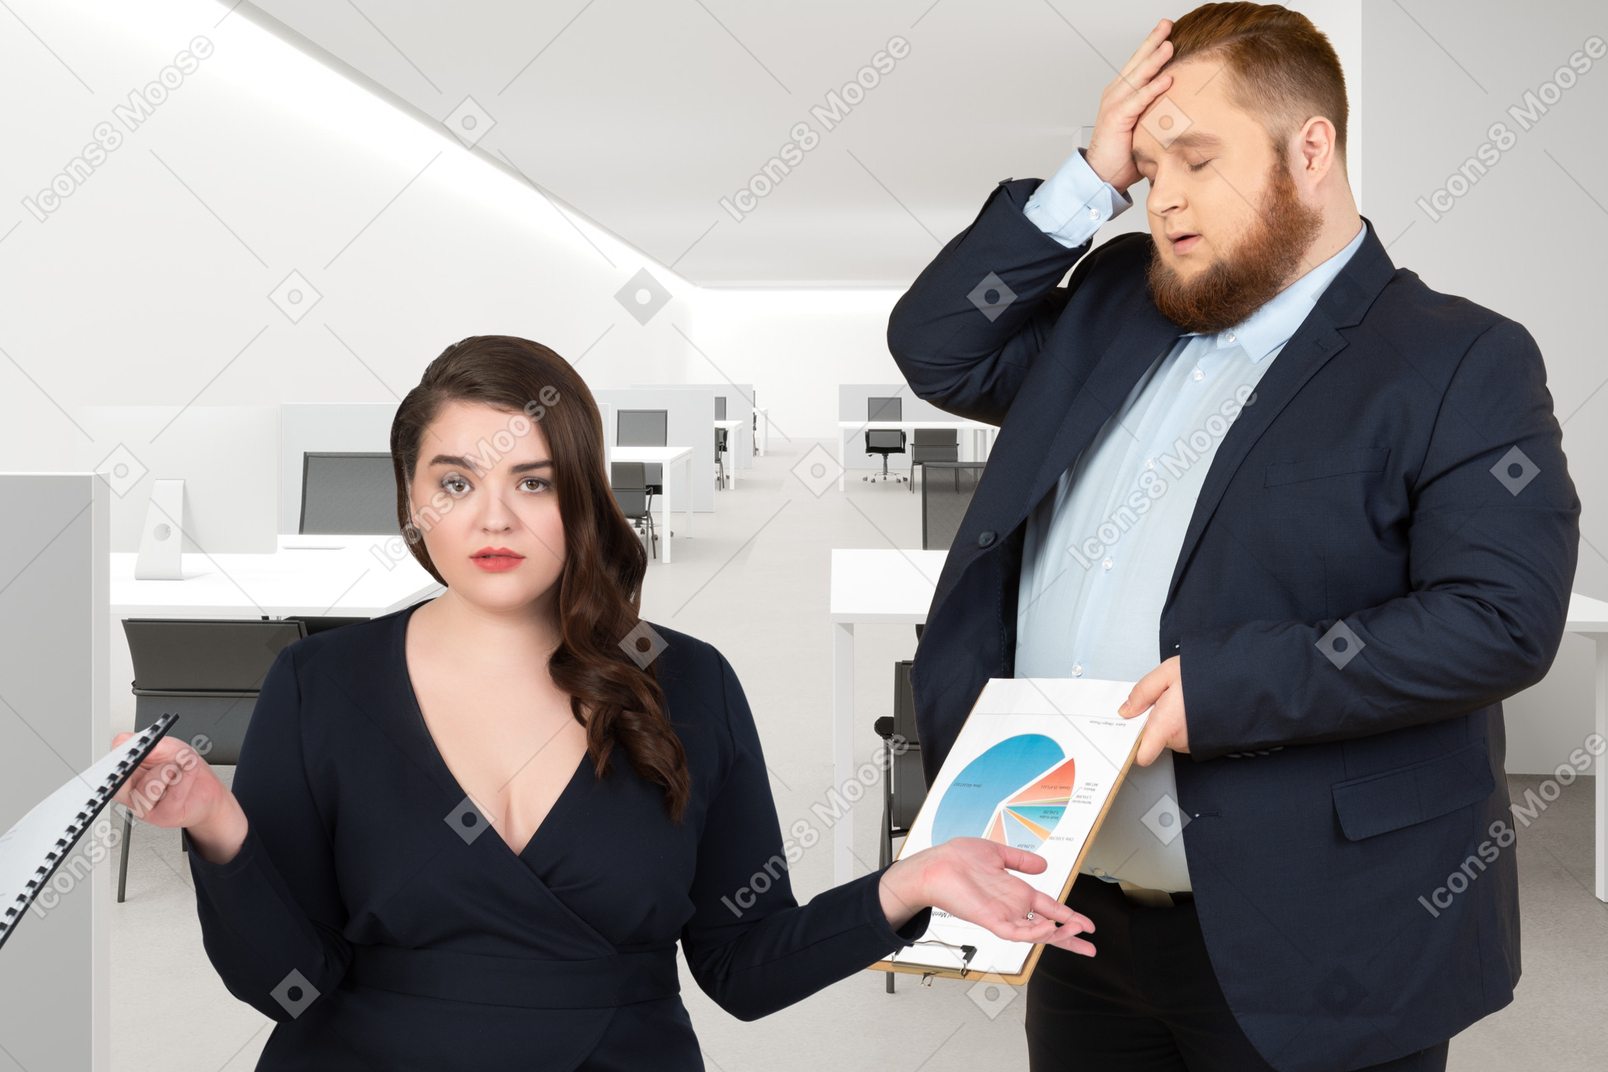 A male colleague facepalming and holding a graph report next to a female colleague